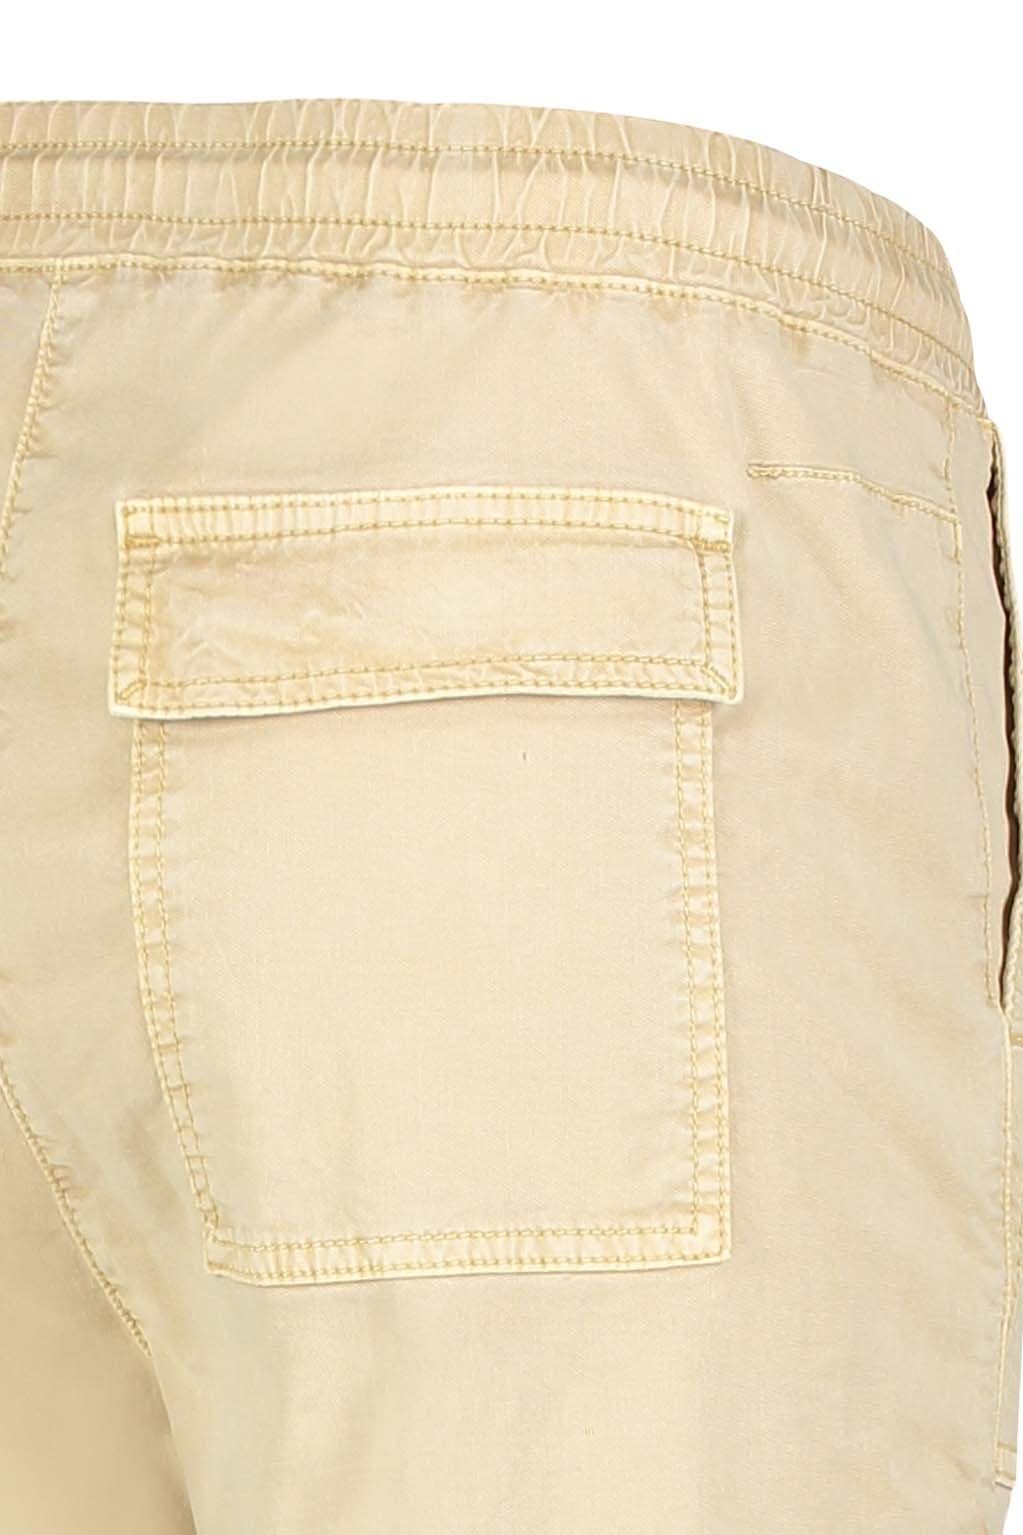 2774-00-0407 SHORTS MAC PPT light EASY MAC 216R Stretch-Jeans biscuit